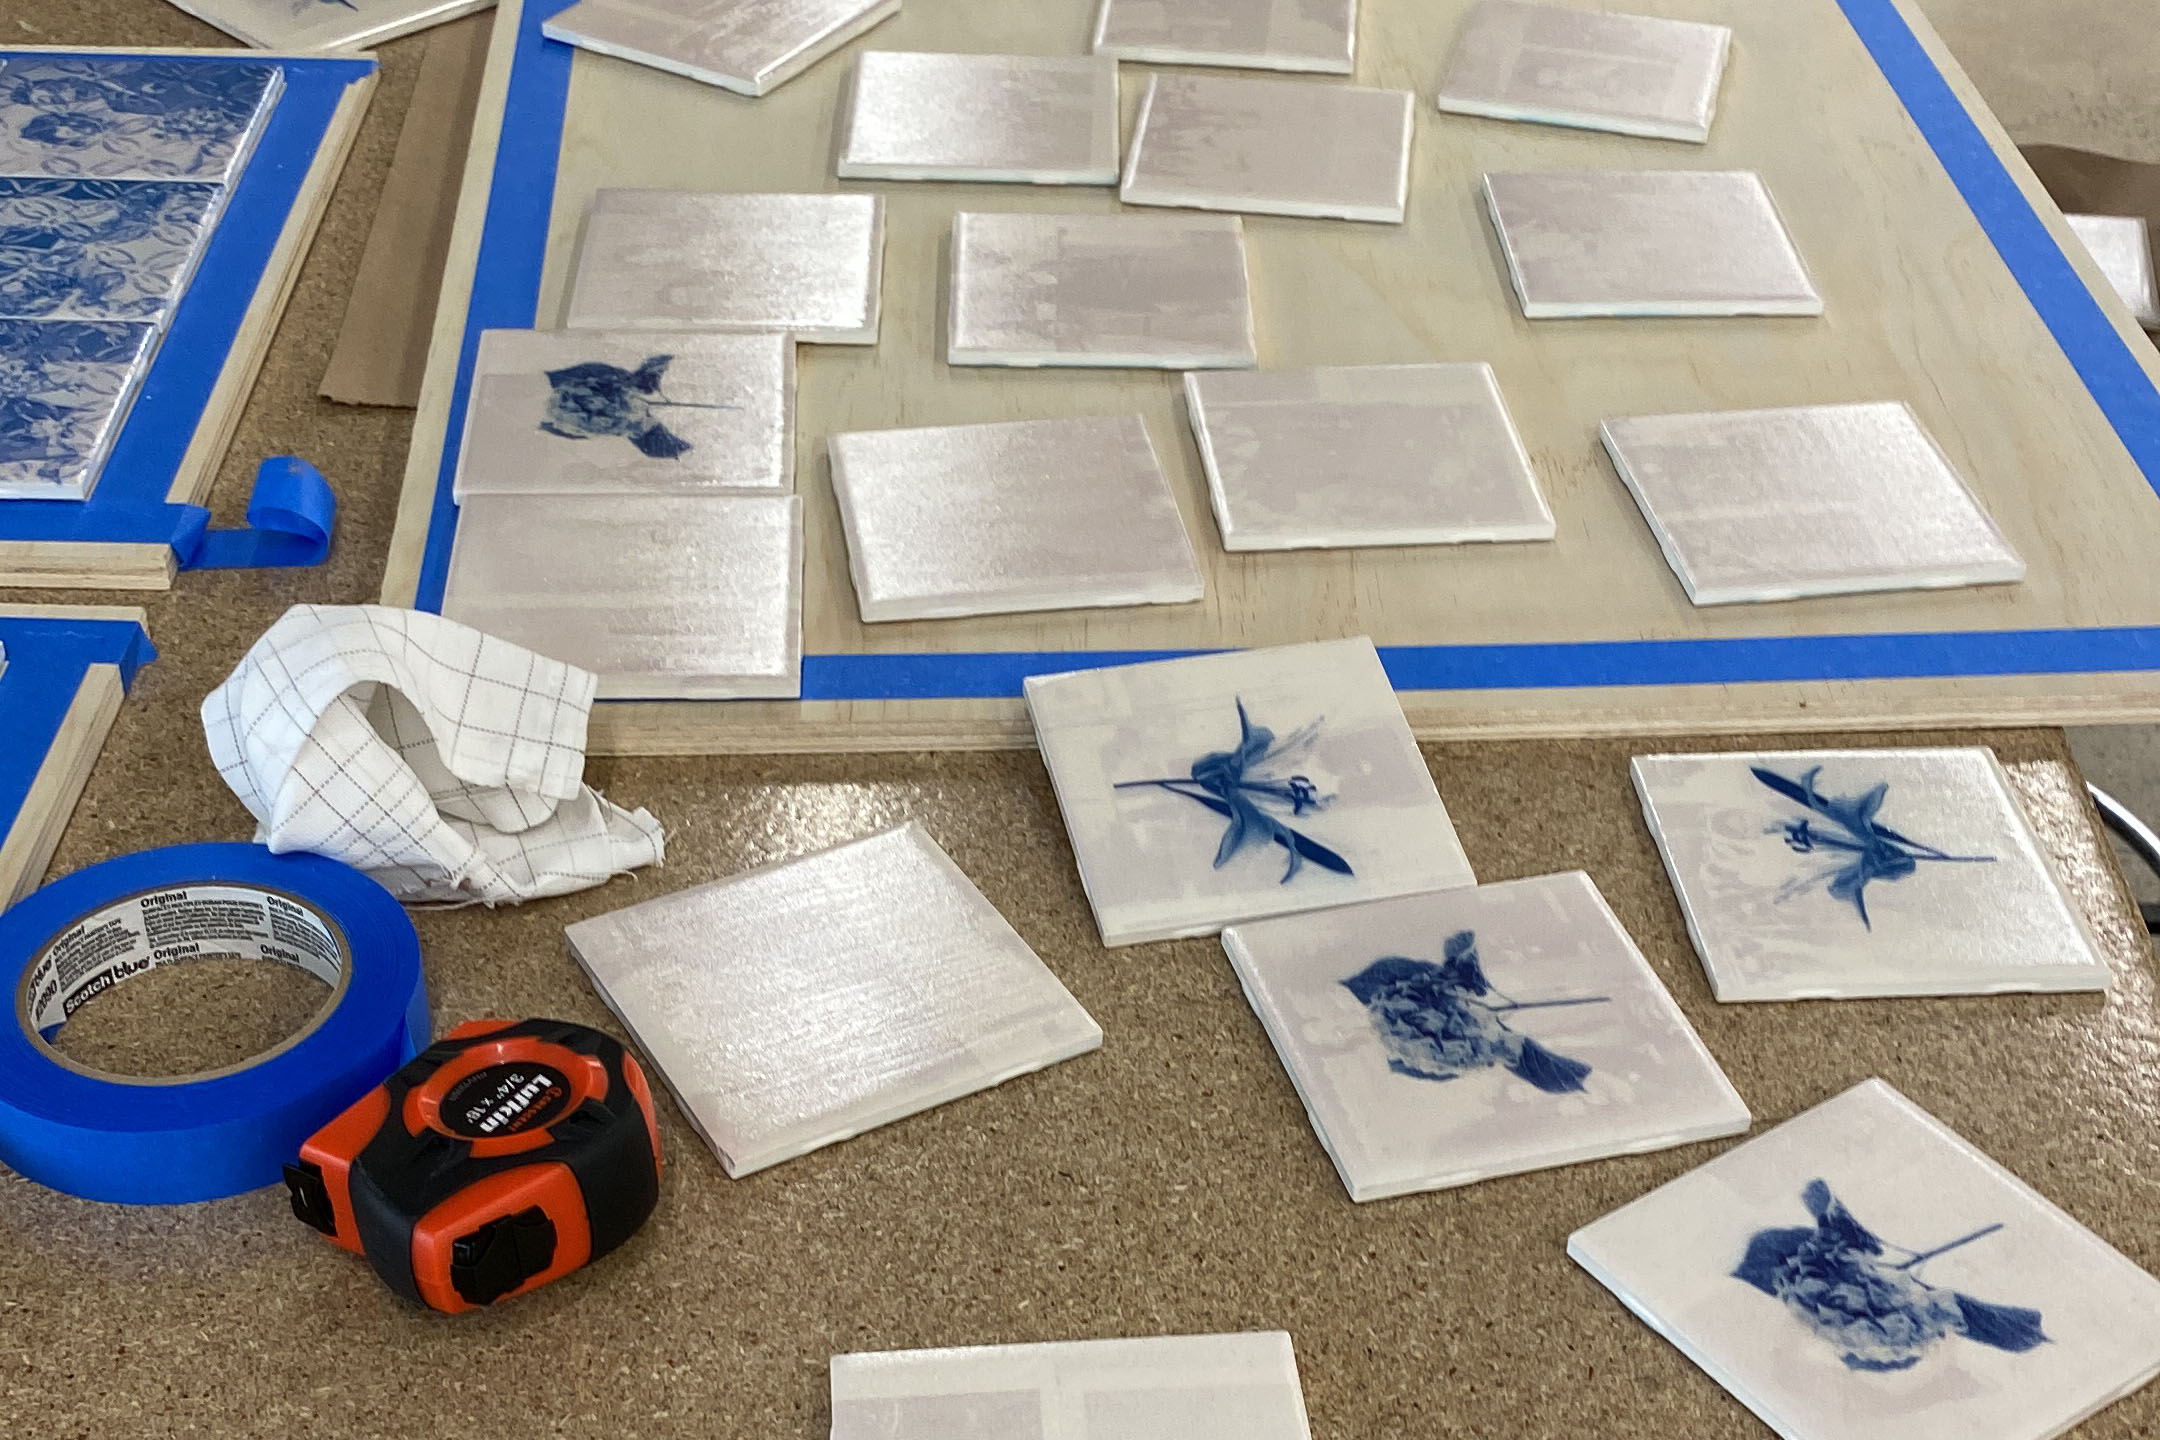 A work station covered in small square tiles . Some tiles have blue and white flowers printed on the surface. 